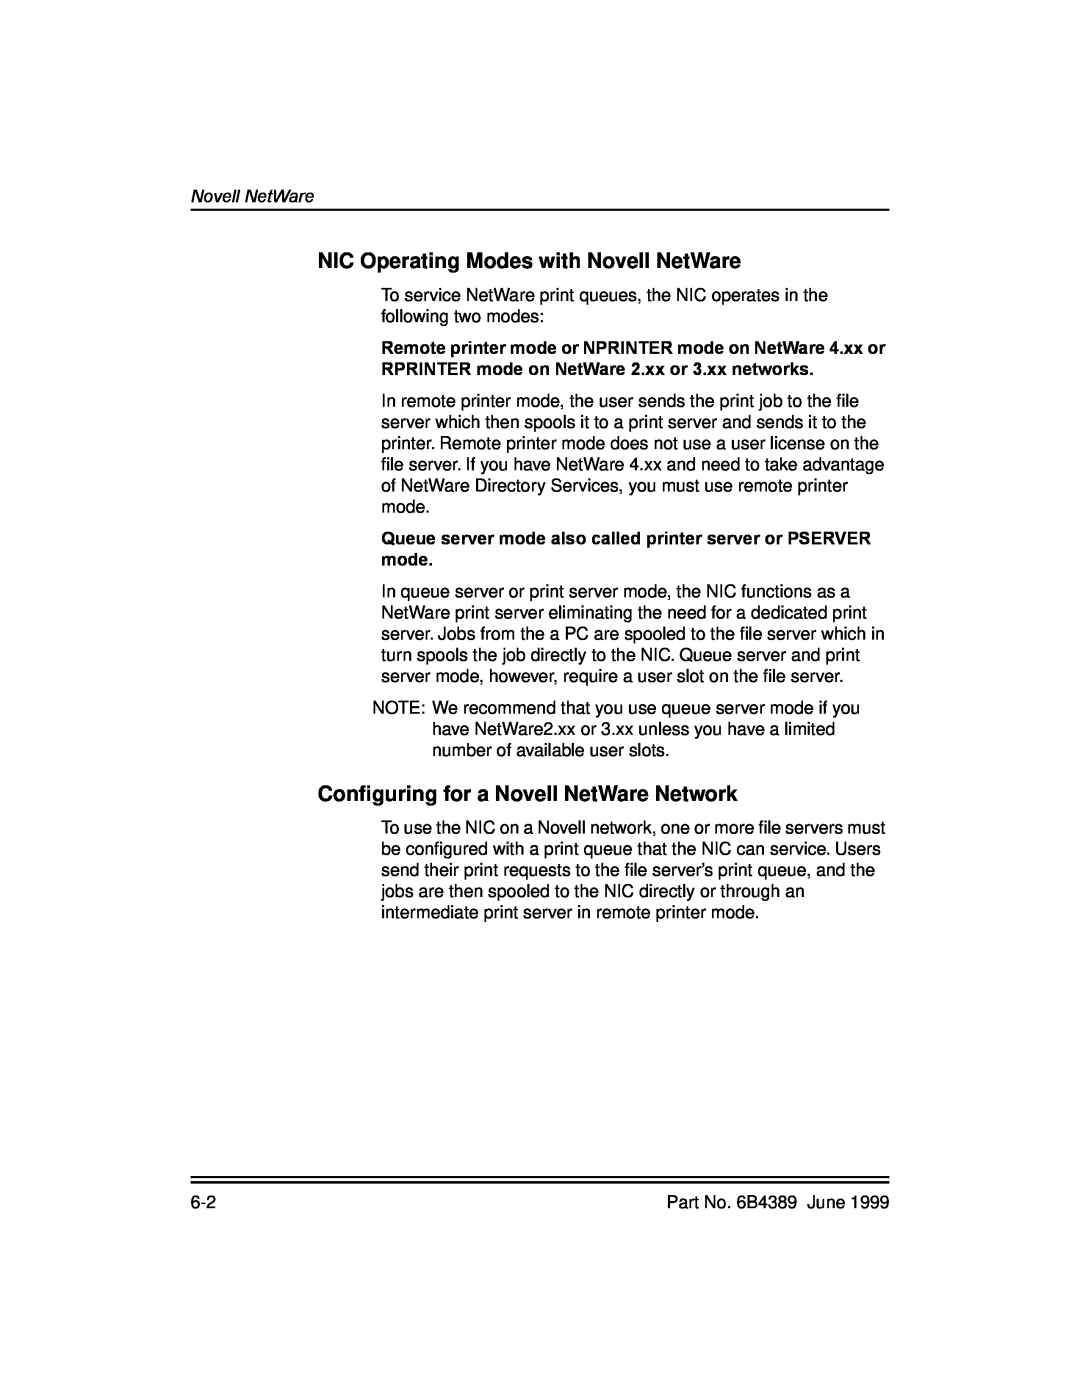 Kodak 8670, 8660 manual NIC Operating Modes with Novell NetWare, Conﬁguring for a Novell NetWare Network 